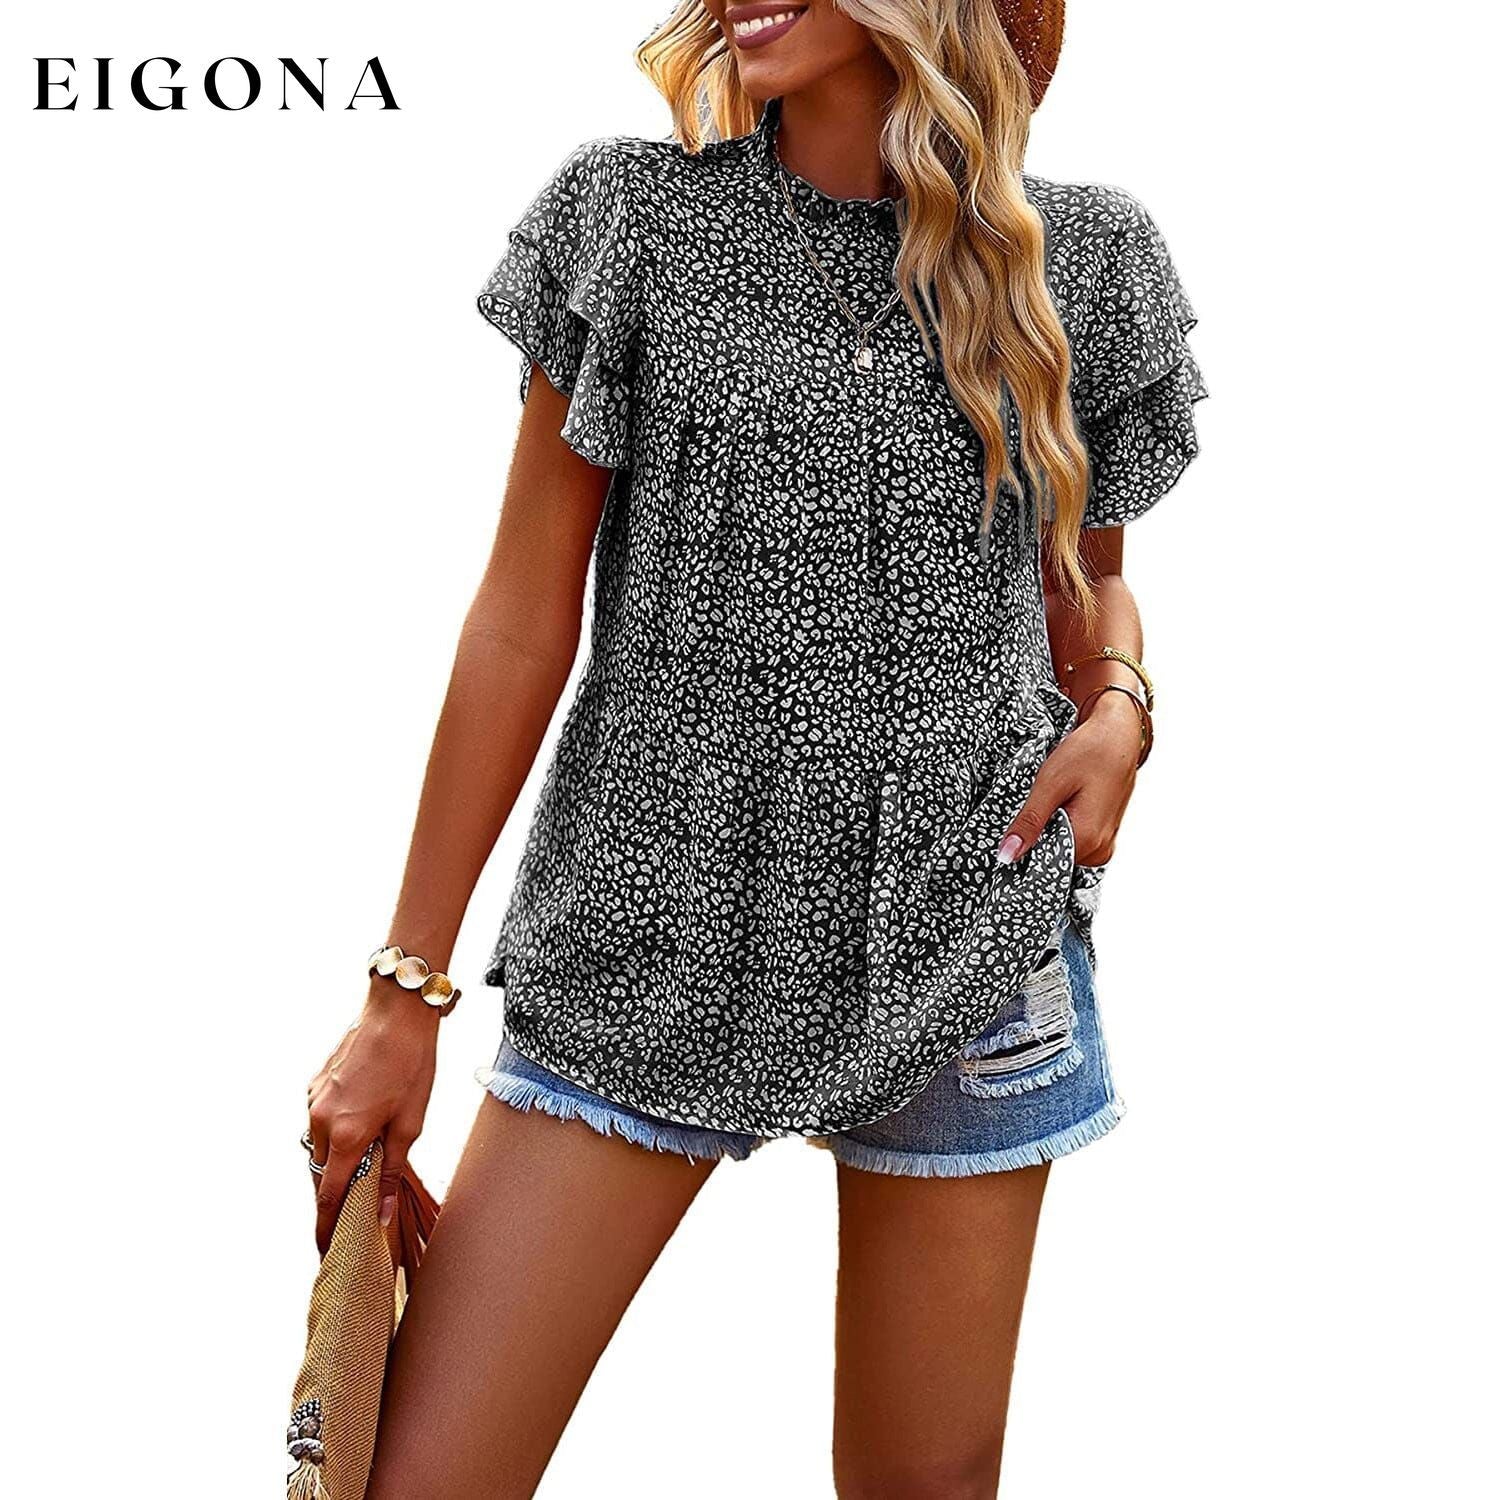 Women's Casual Summer Tops Ruffle Short Sleeve Mock Neck Fashion Floral Chiffon Blouse Shirts Black __stock:200 clothes refund_fee:1200 tops